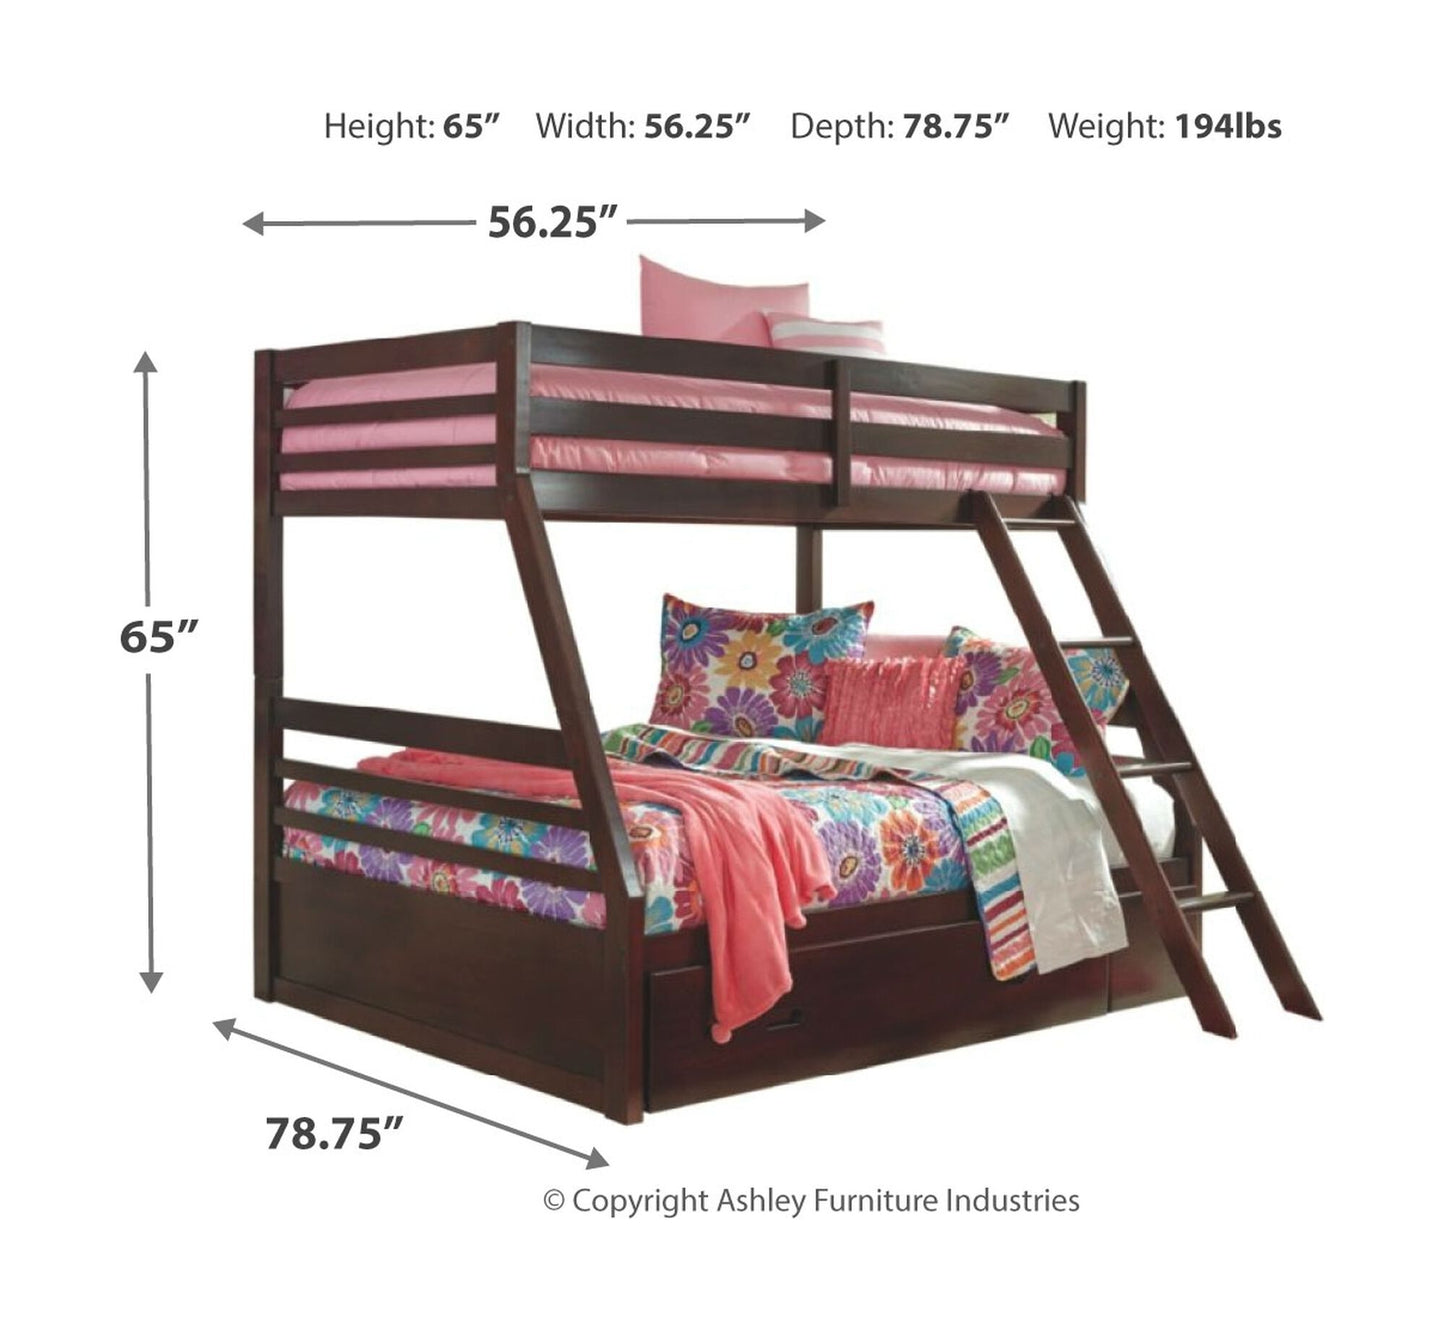 Halanton - Dark Brown - Twin over Full Bunk Bed with 1 Large Storage Drawer